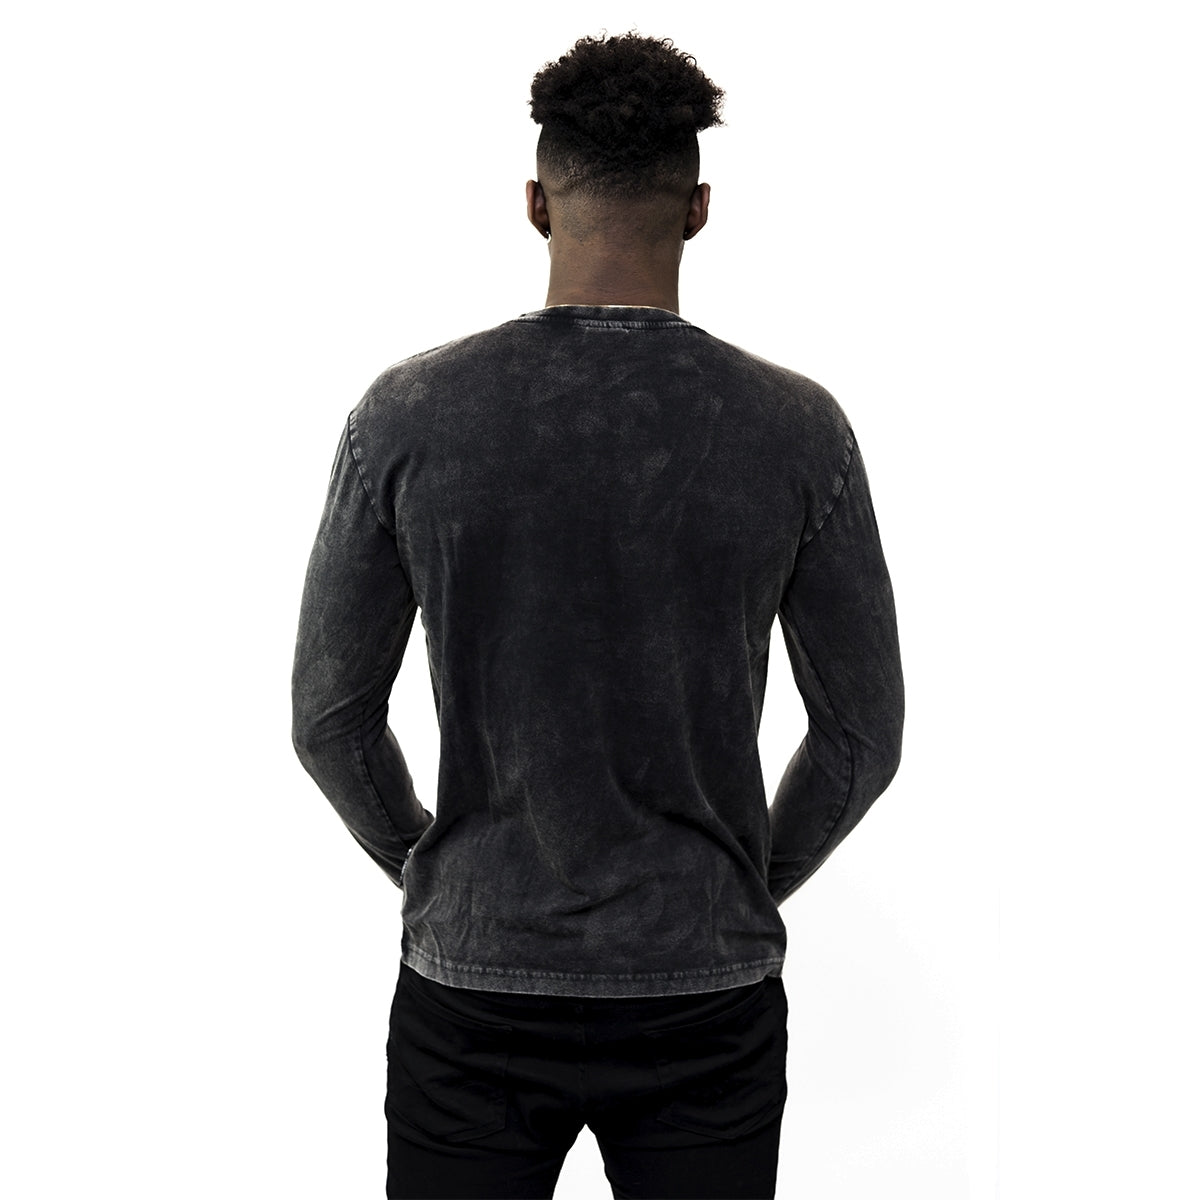 The back view of a man wearing a black Guinness UK Classic Henley t-shirt.